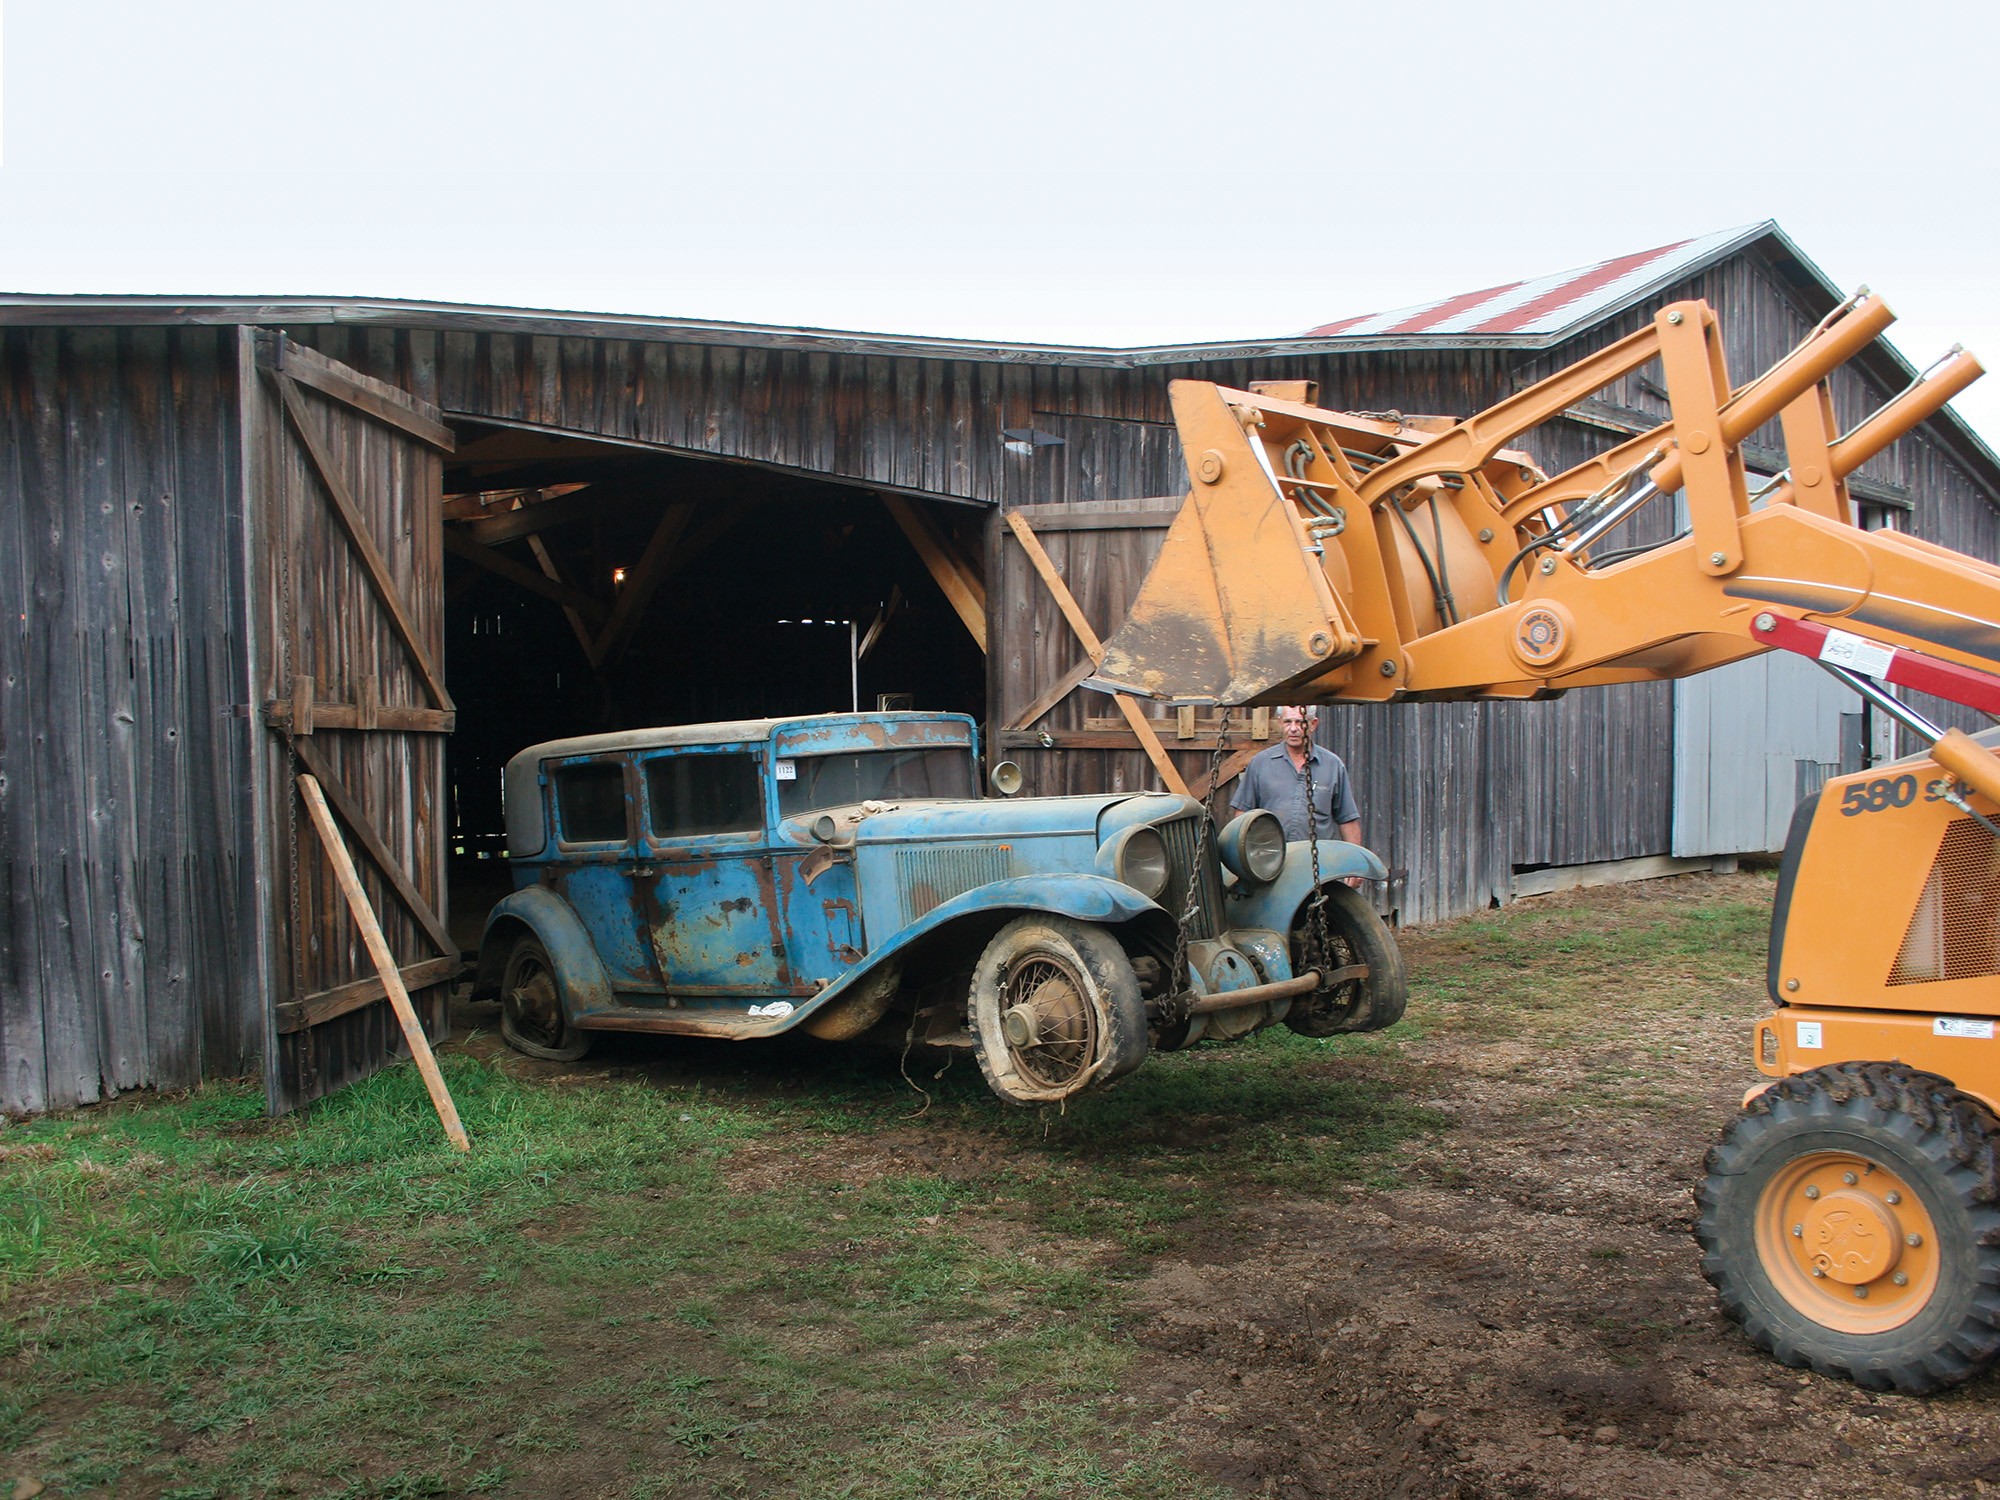 The Saga of a Twice-Abandoned 1930 Cord L-29 Brougham